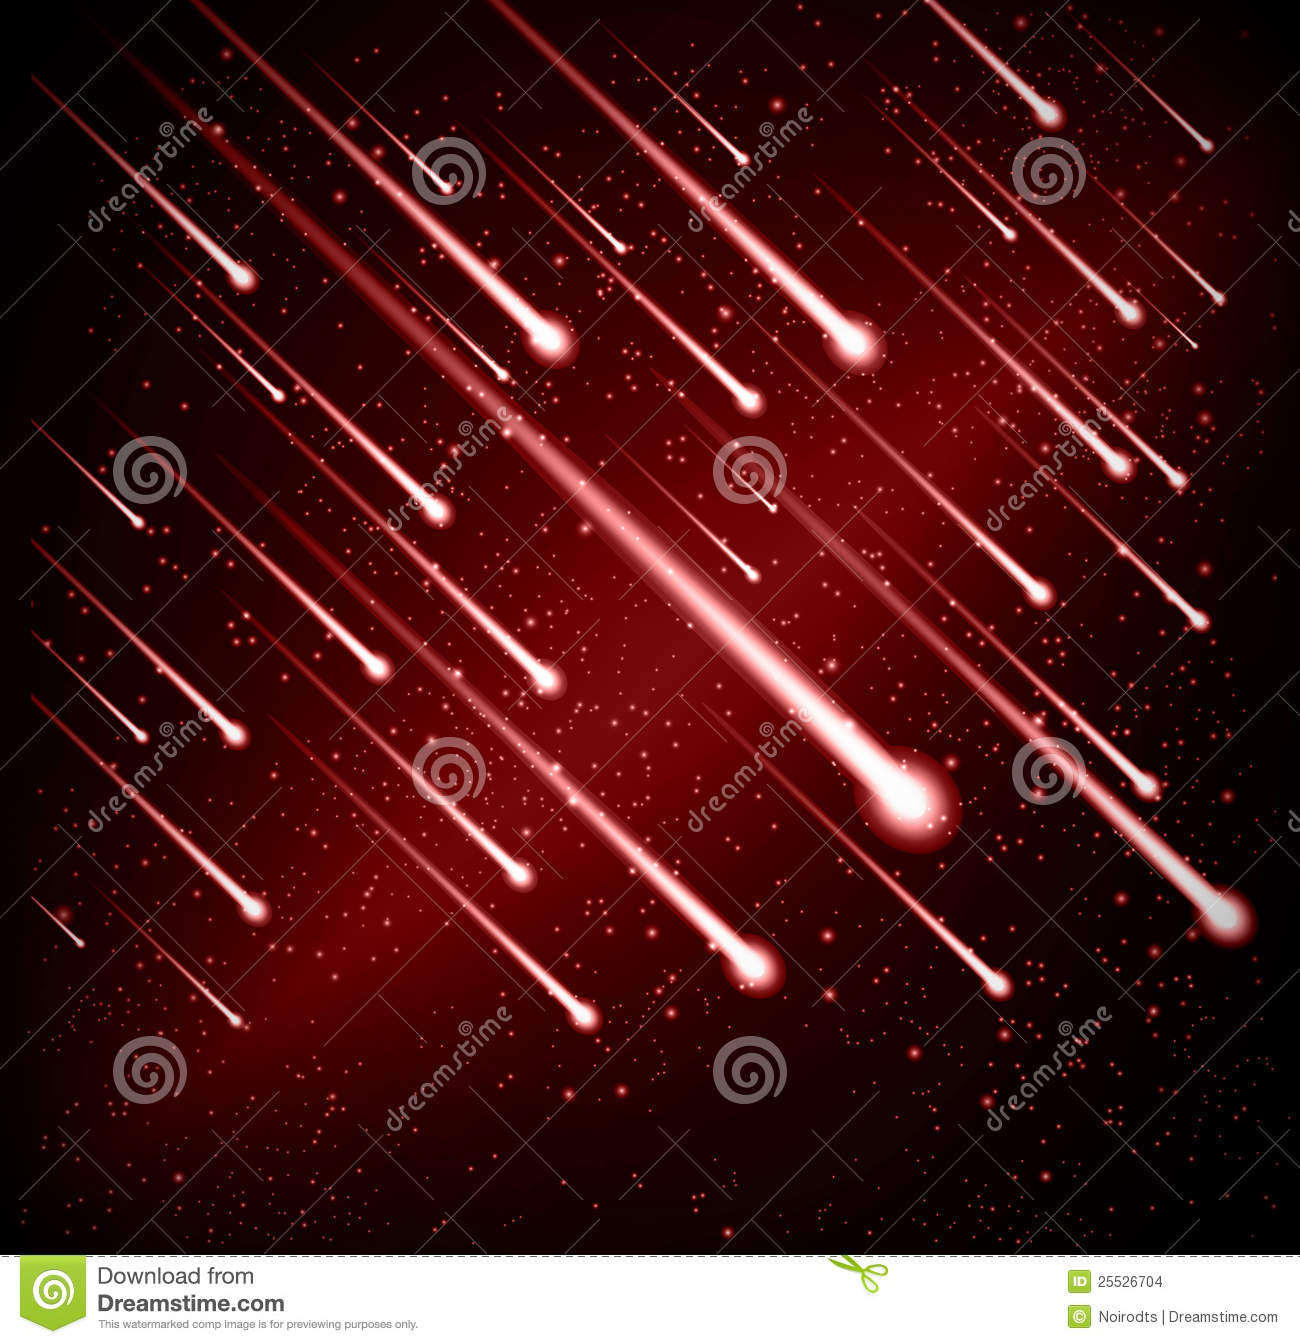 Meteor Shower clipart #12, Download drawings